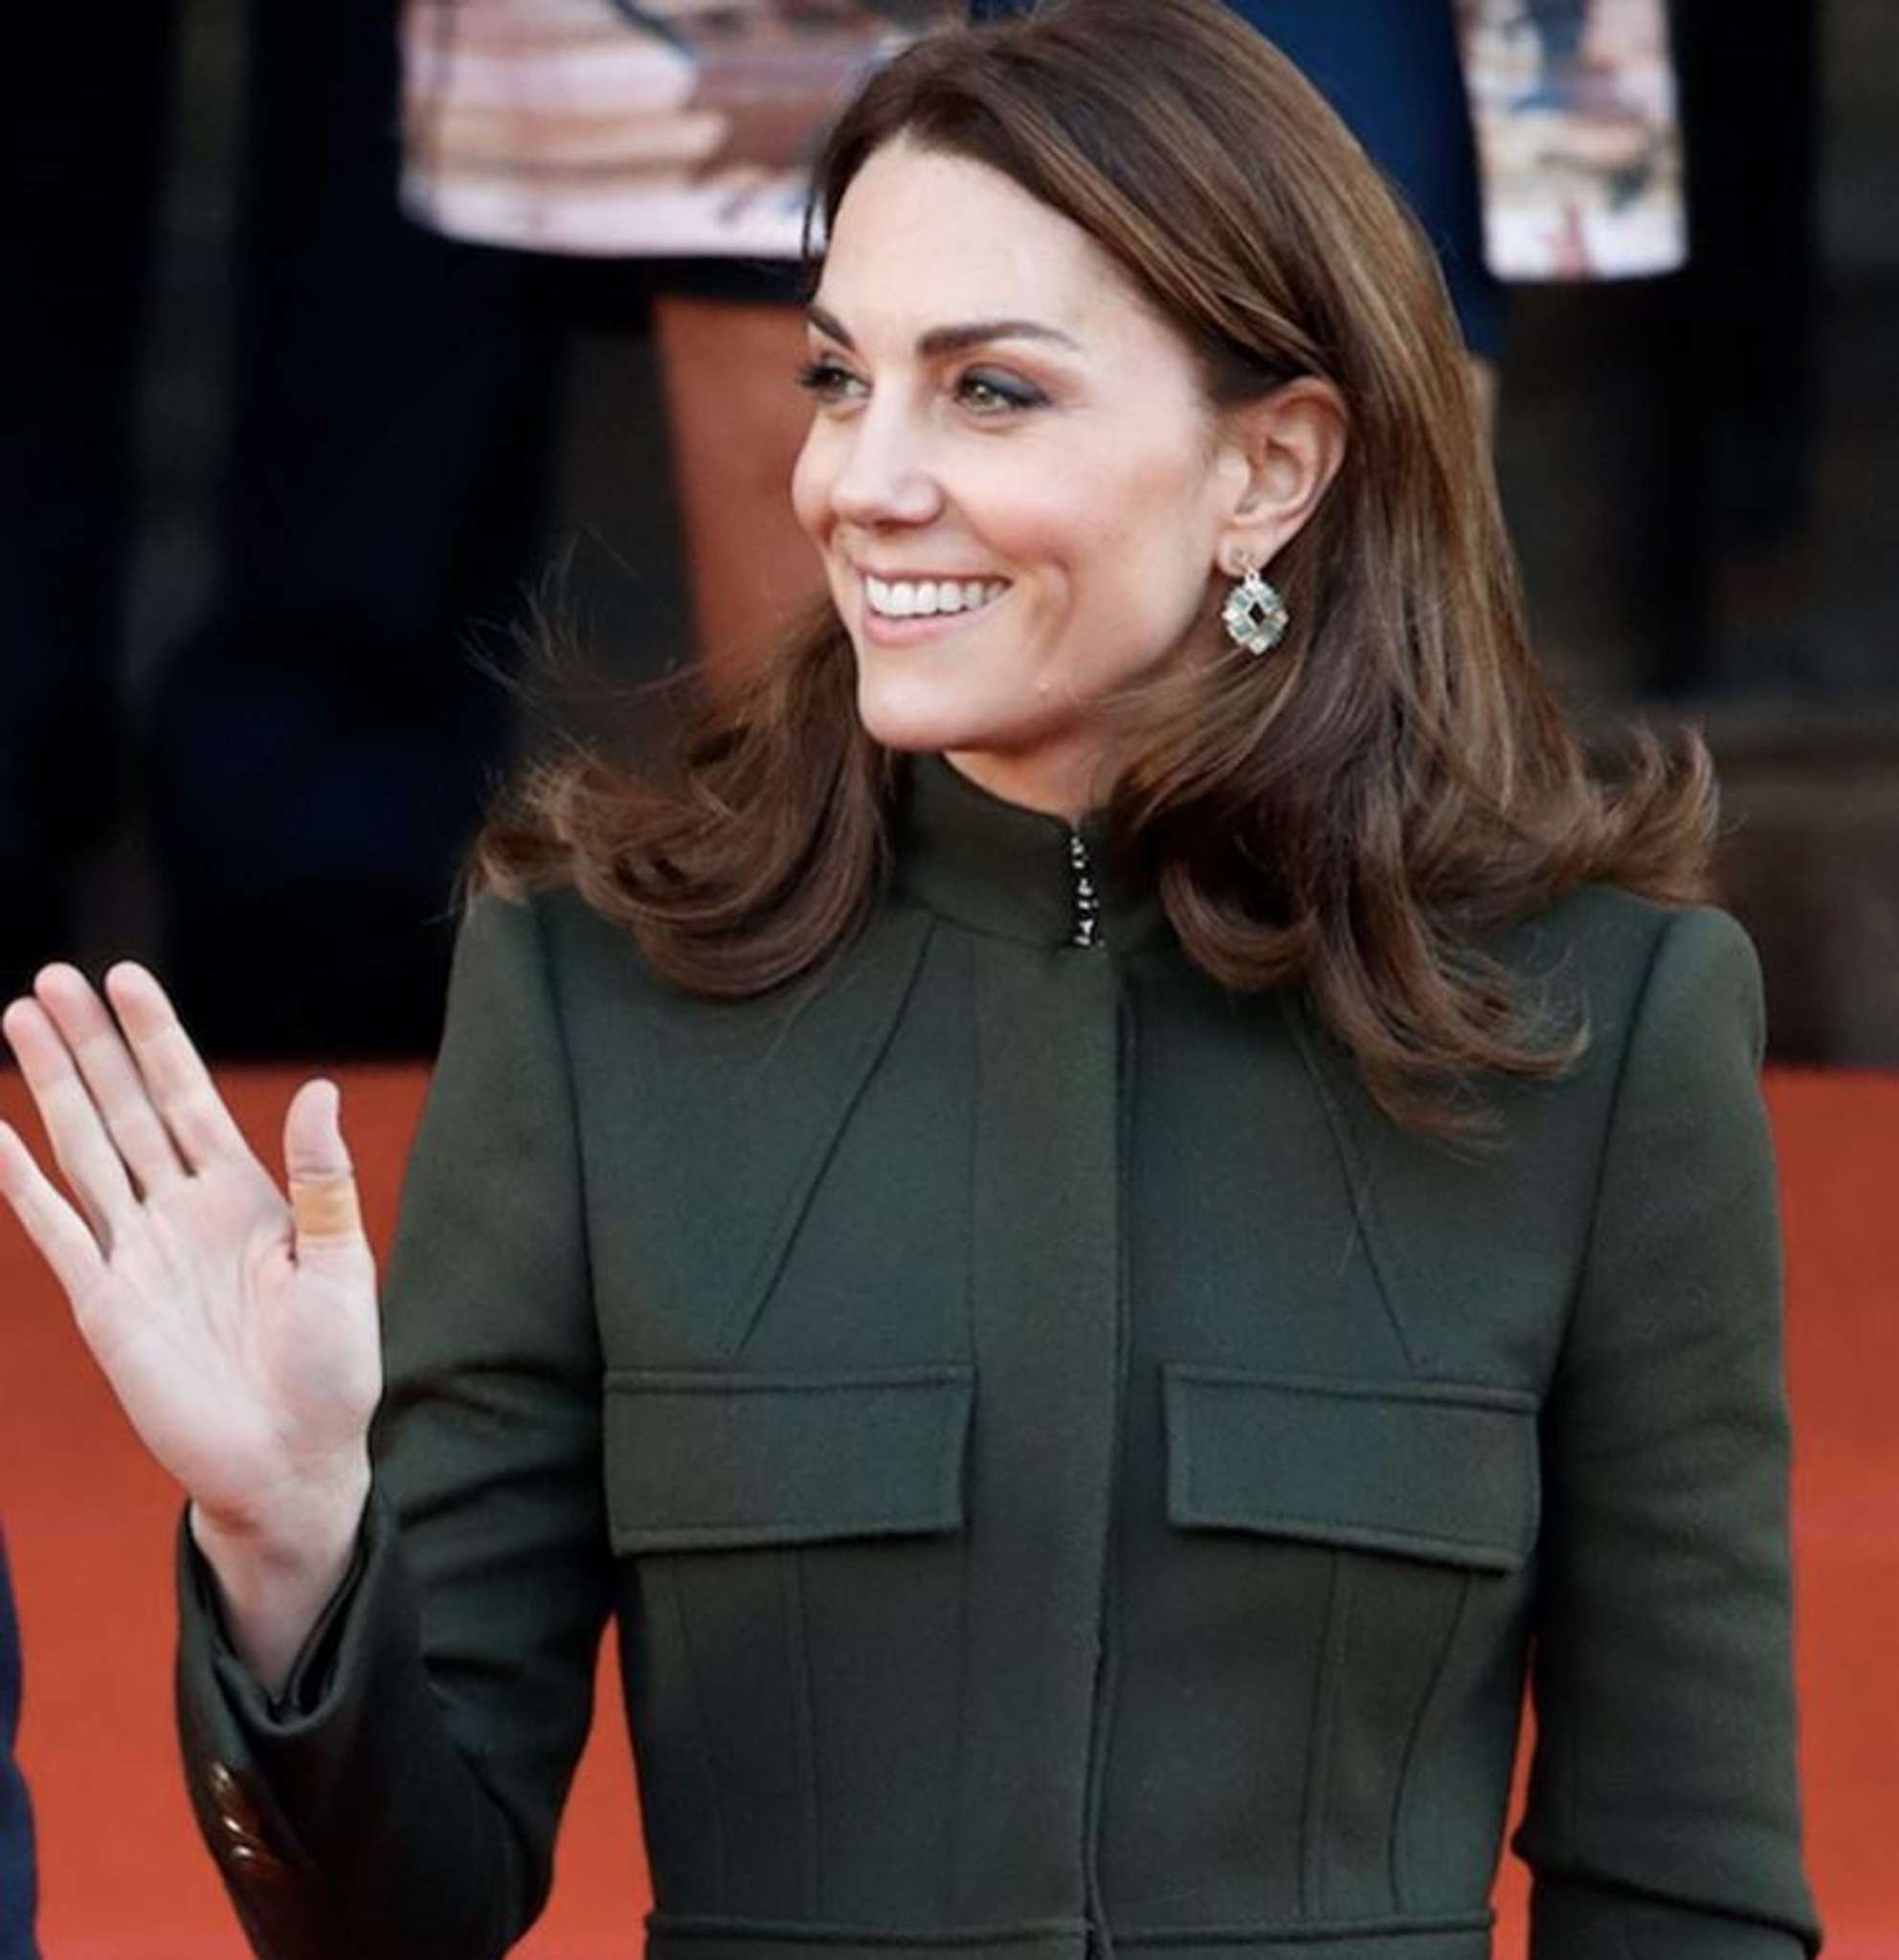 kate-middleton-hurt-her-hand-watch-out-williams-wife-worried-the-british